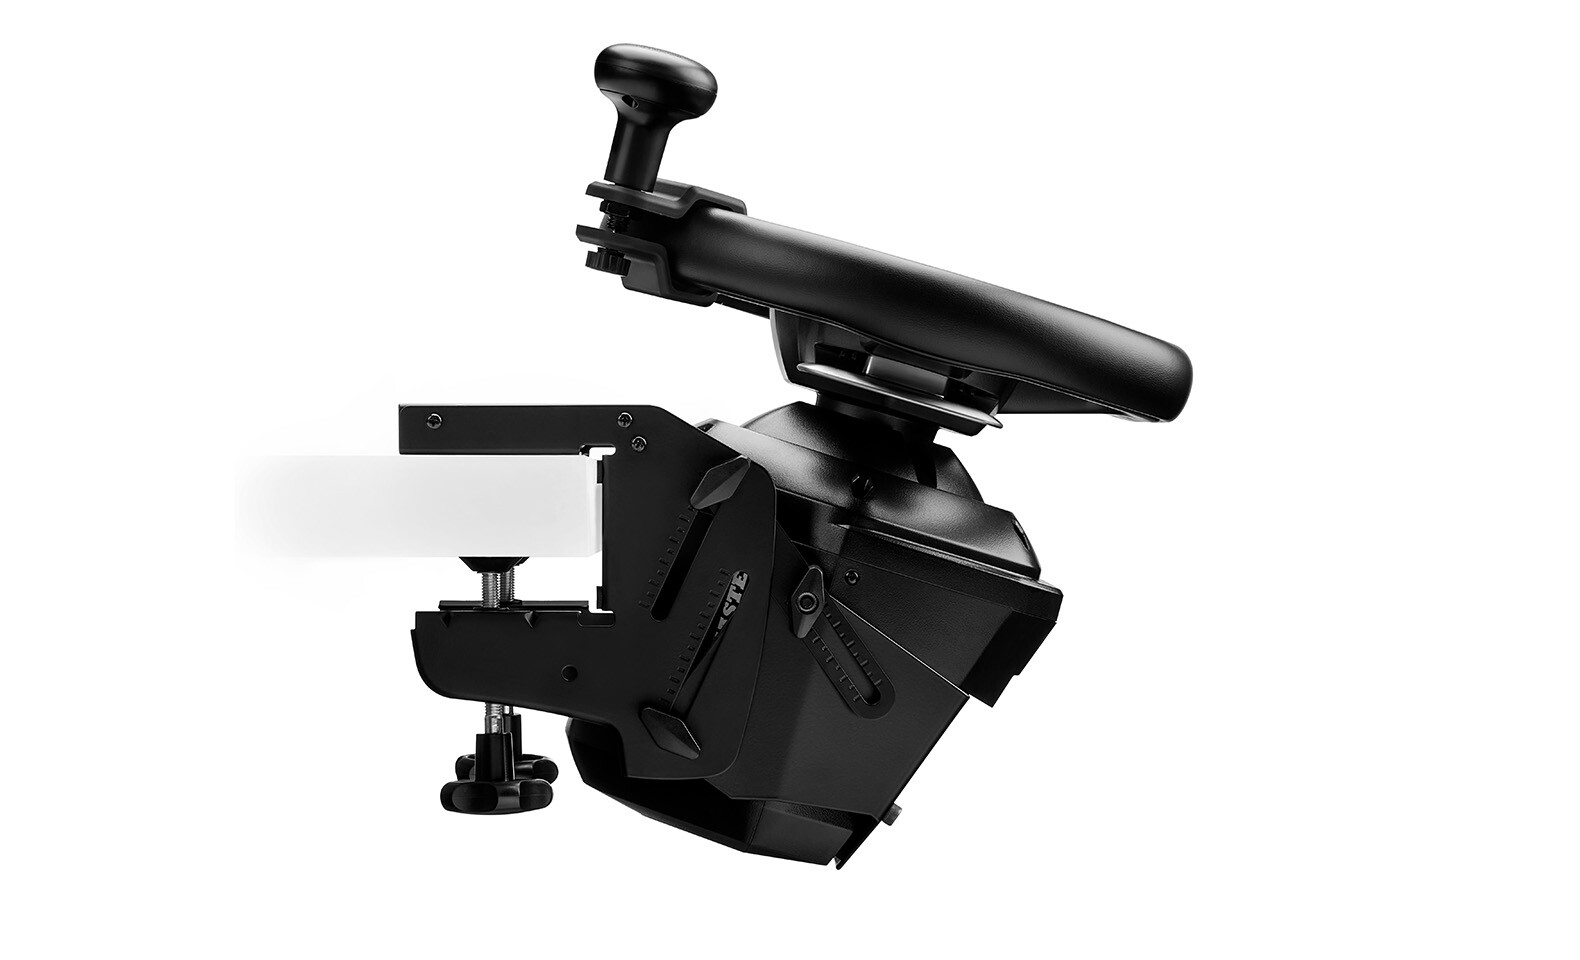 Thrustmaster unveils its sporty new TH8S Shifter Add-On